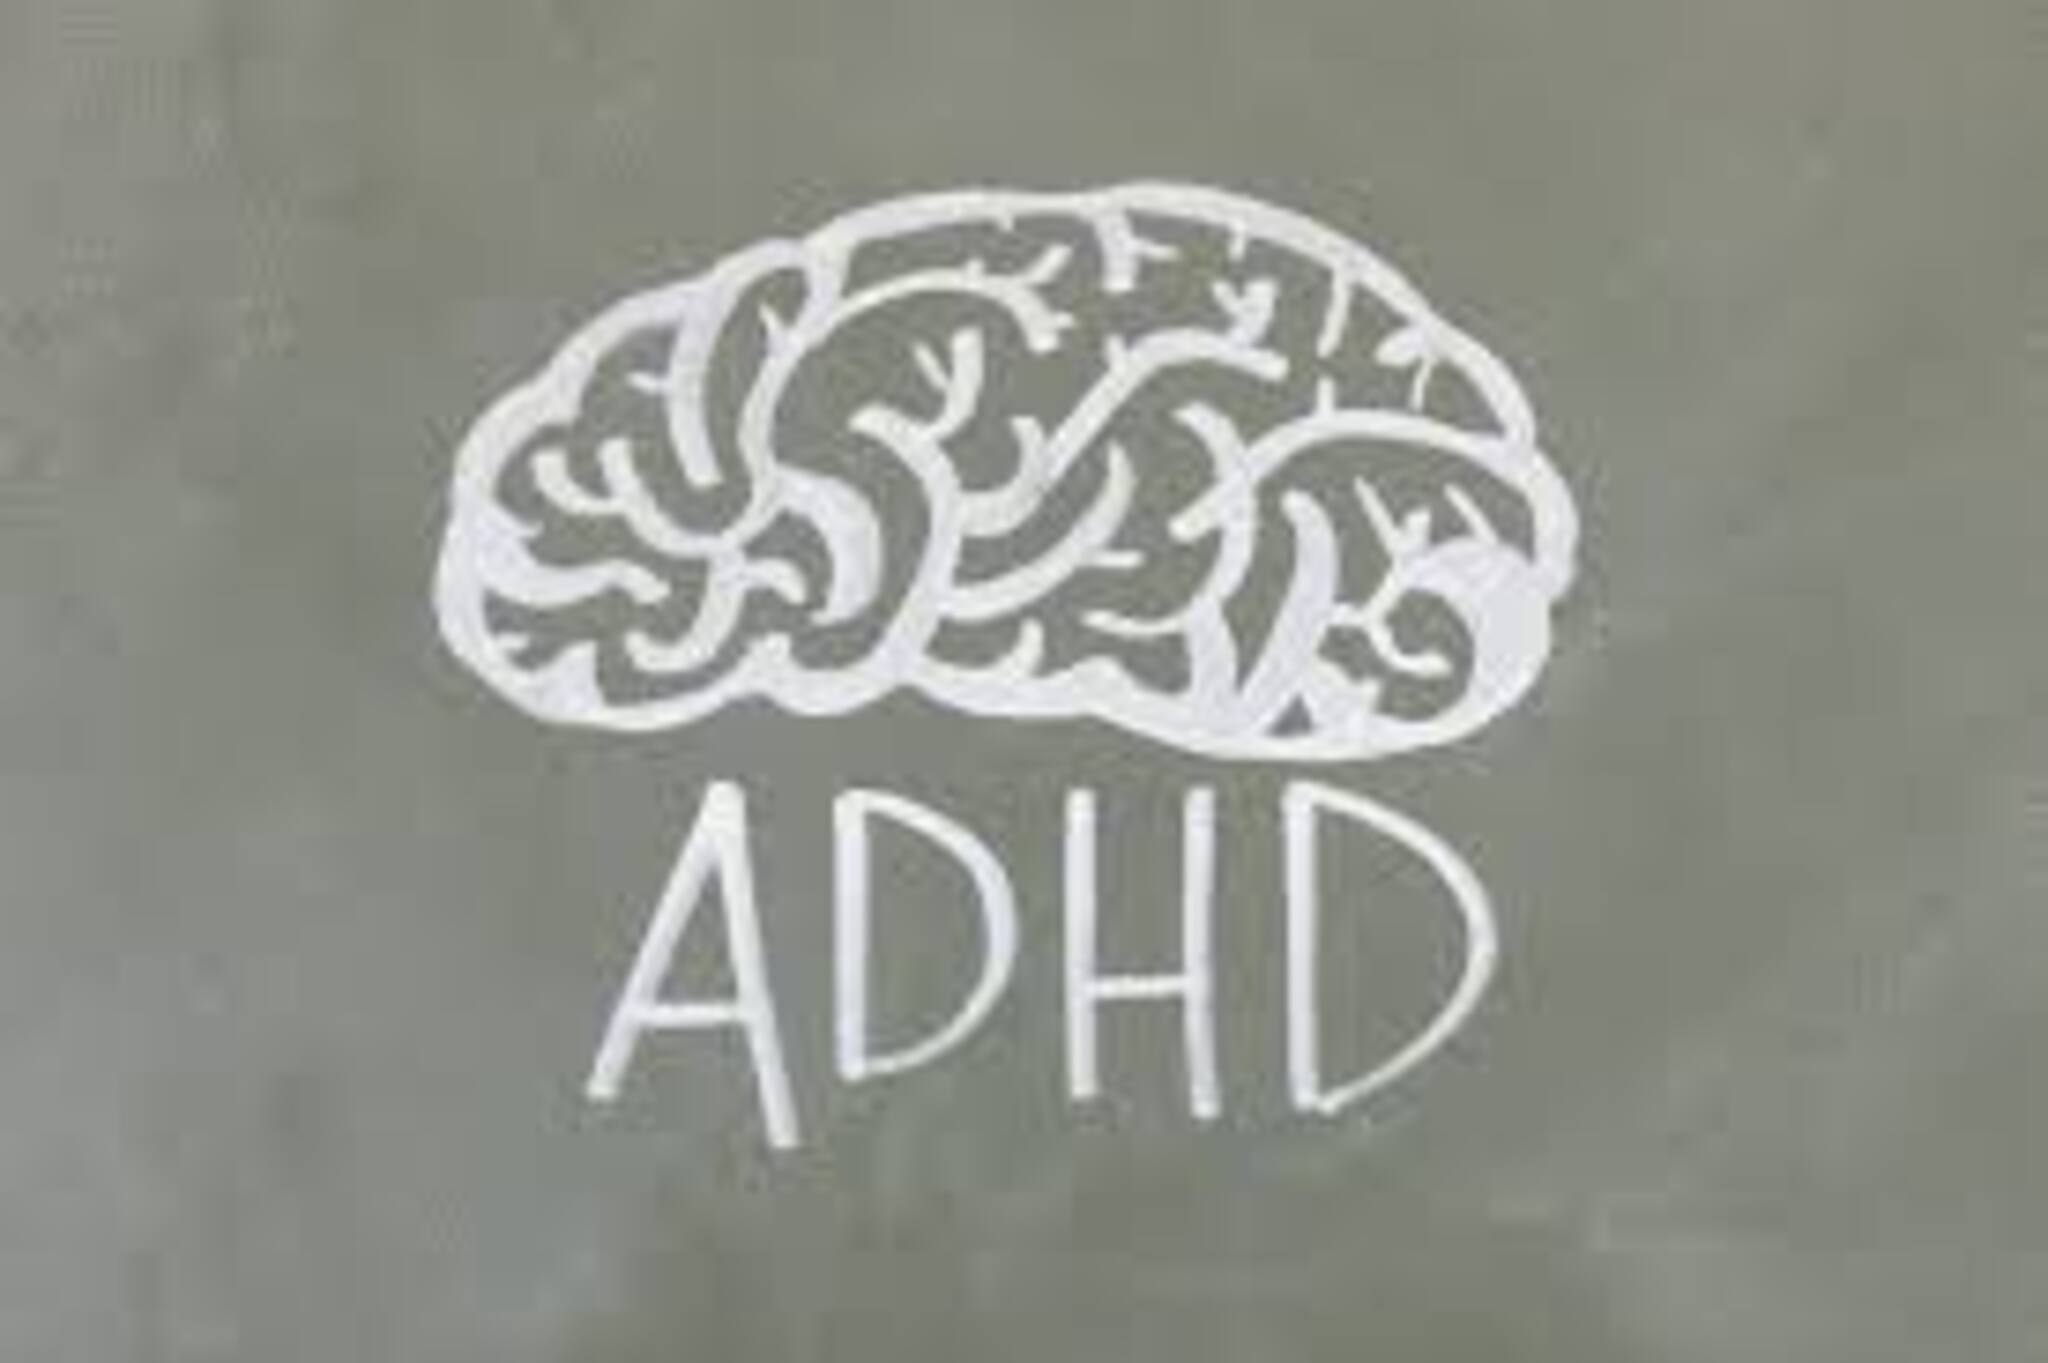 SIX REASONS WHY SHOWERING IS DIFFICULT WITH ADHD